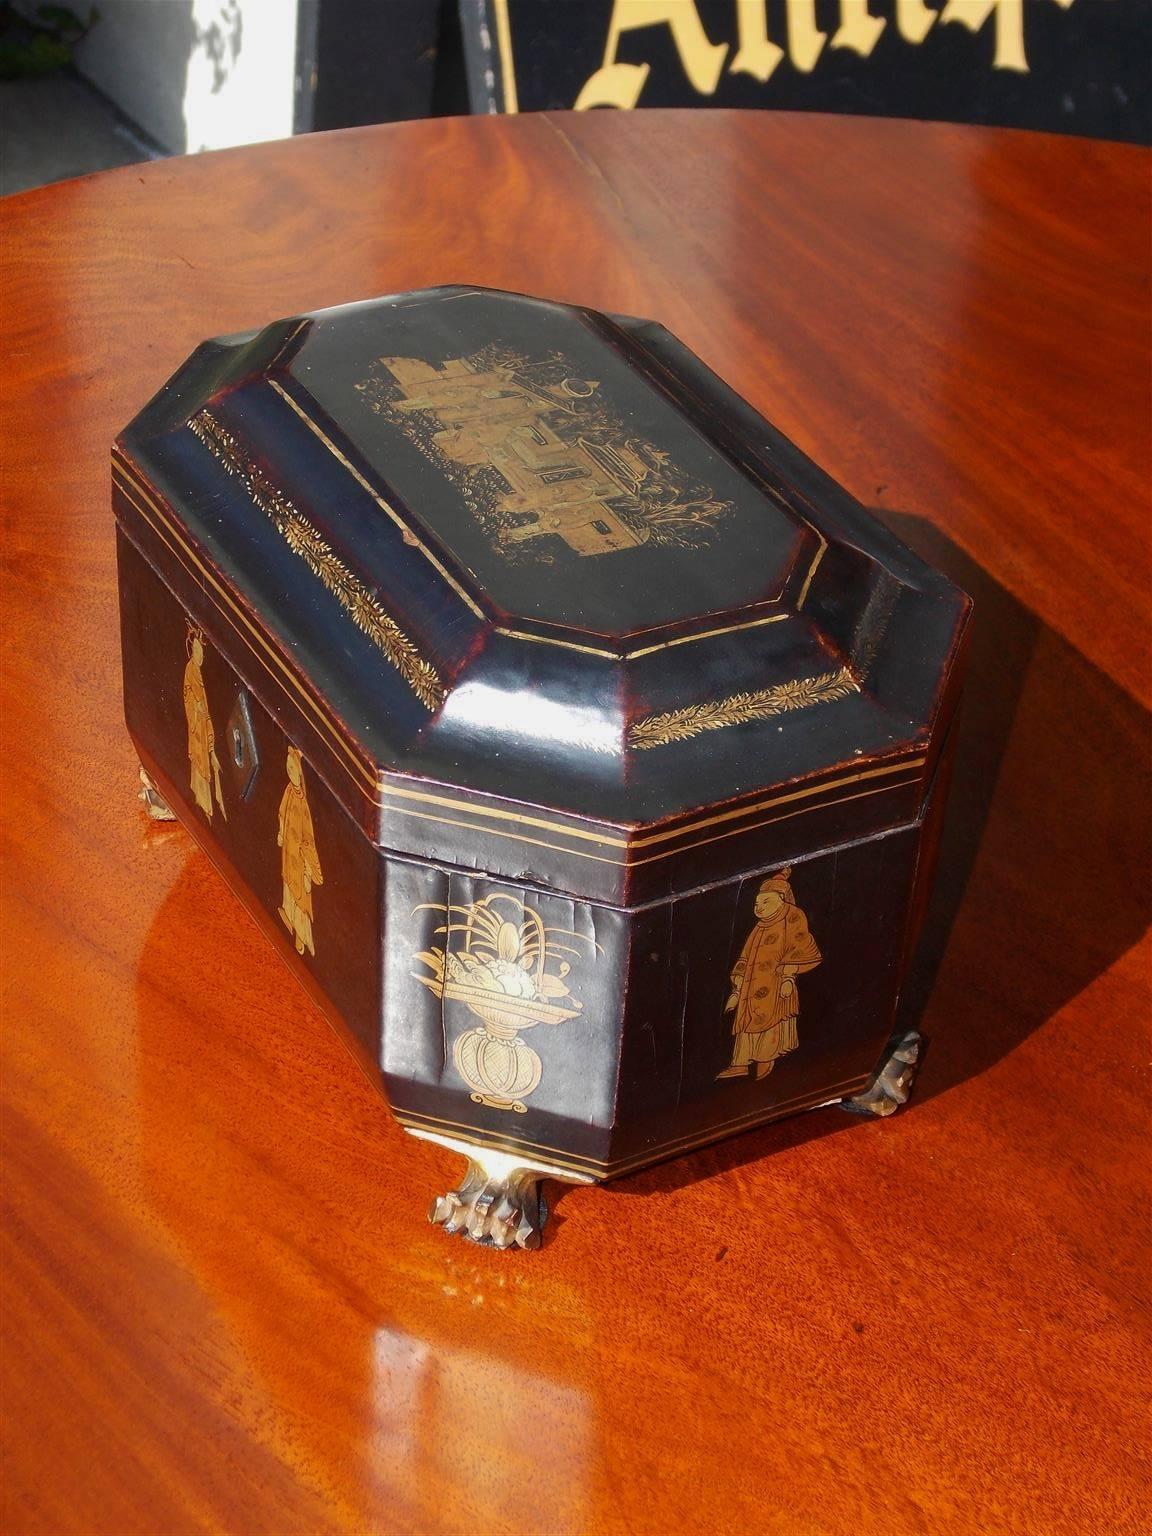 English Japanned black lacquered tea caddy with gilt figural landscape scenes, removable interior chased decorative pewter tea bins,  original ivory knobs , lids, and terminating on gilt lions paw feet,  All Original , Early 19th century.